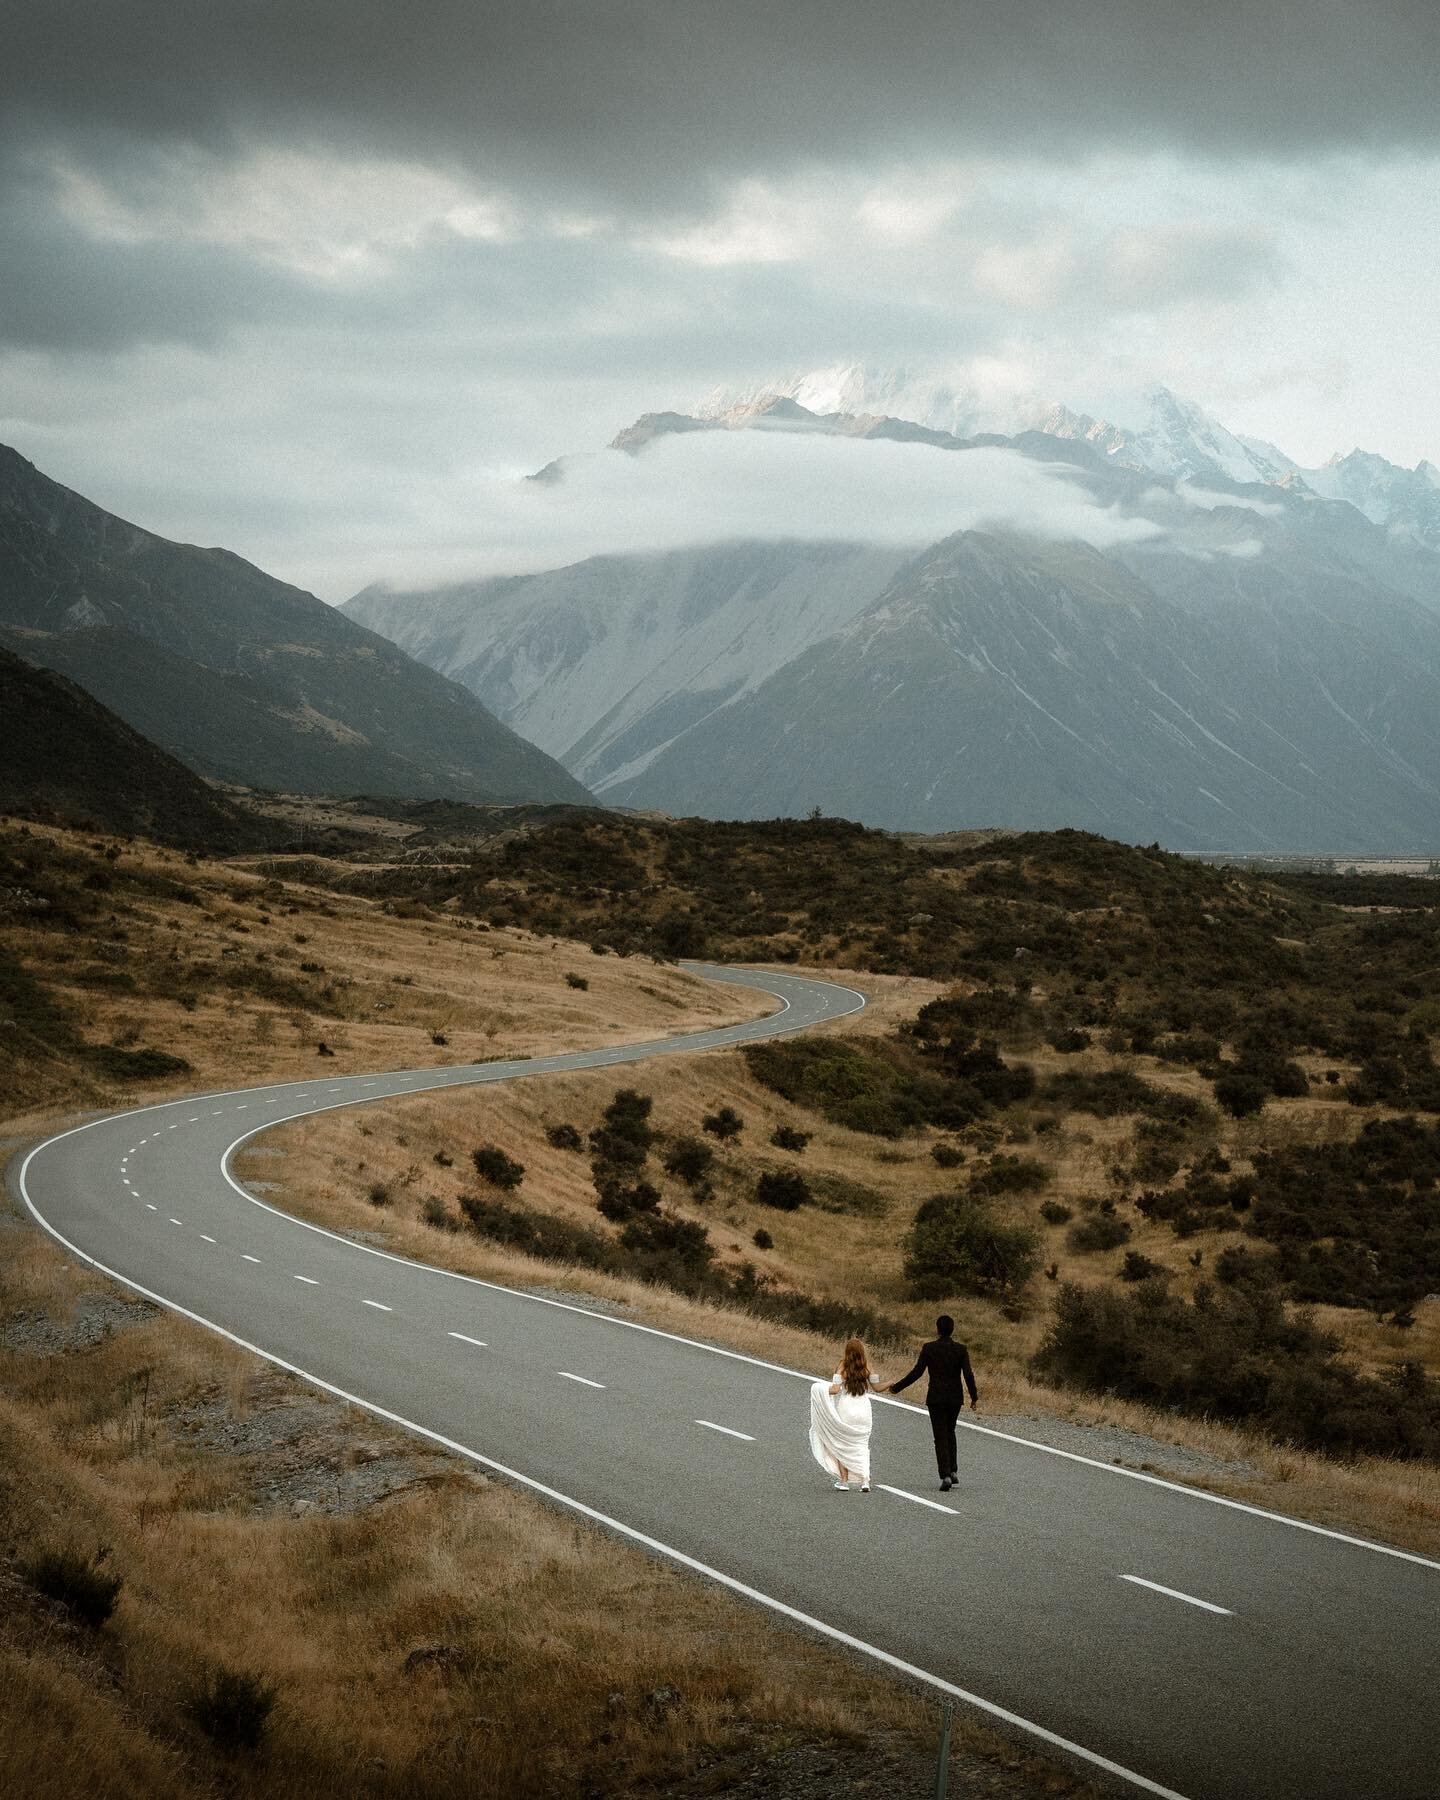 Just a cool wide shot down this stunning road on an amazingly moody autumn day. 
.
.
.
#queenstownphotography
#queenstownweddingphotographer
#queenstownweddingphotography 
#queenstownweddingvideographer
#newzealandweddingphotography
#newzealandweddin